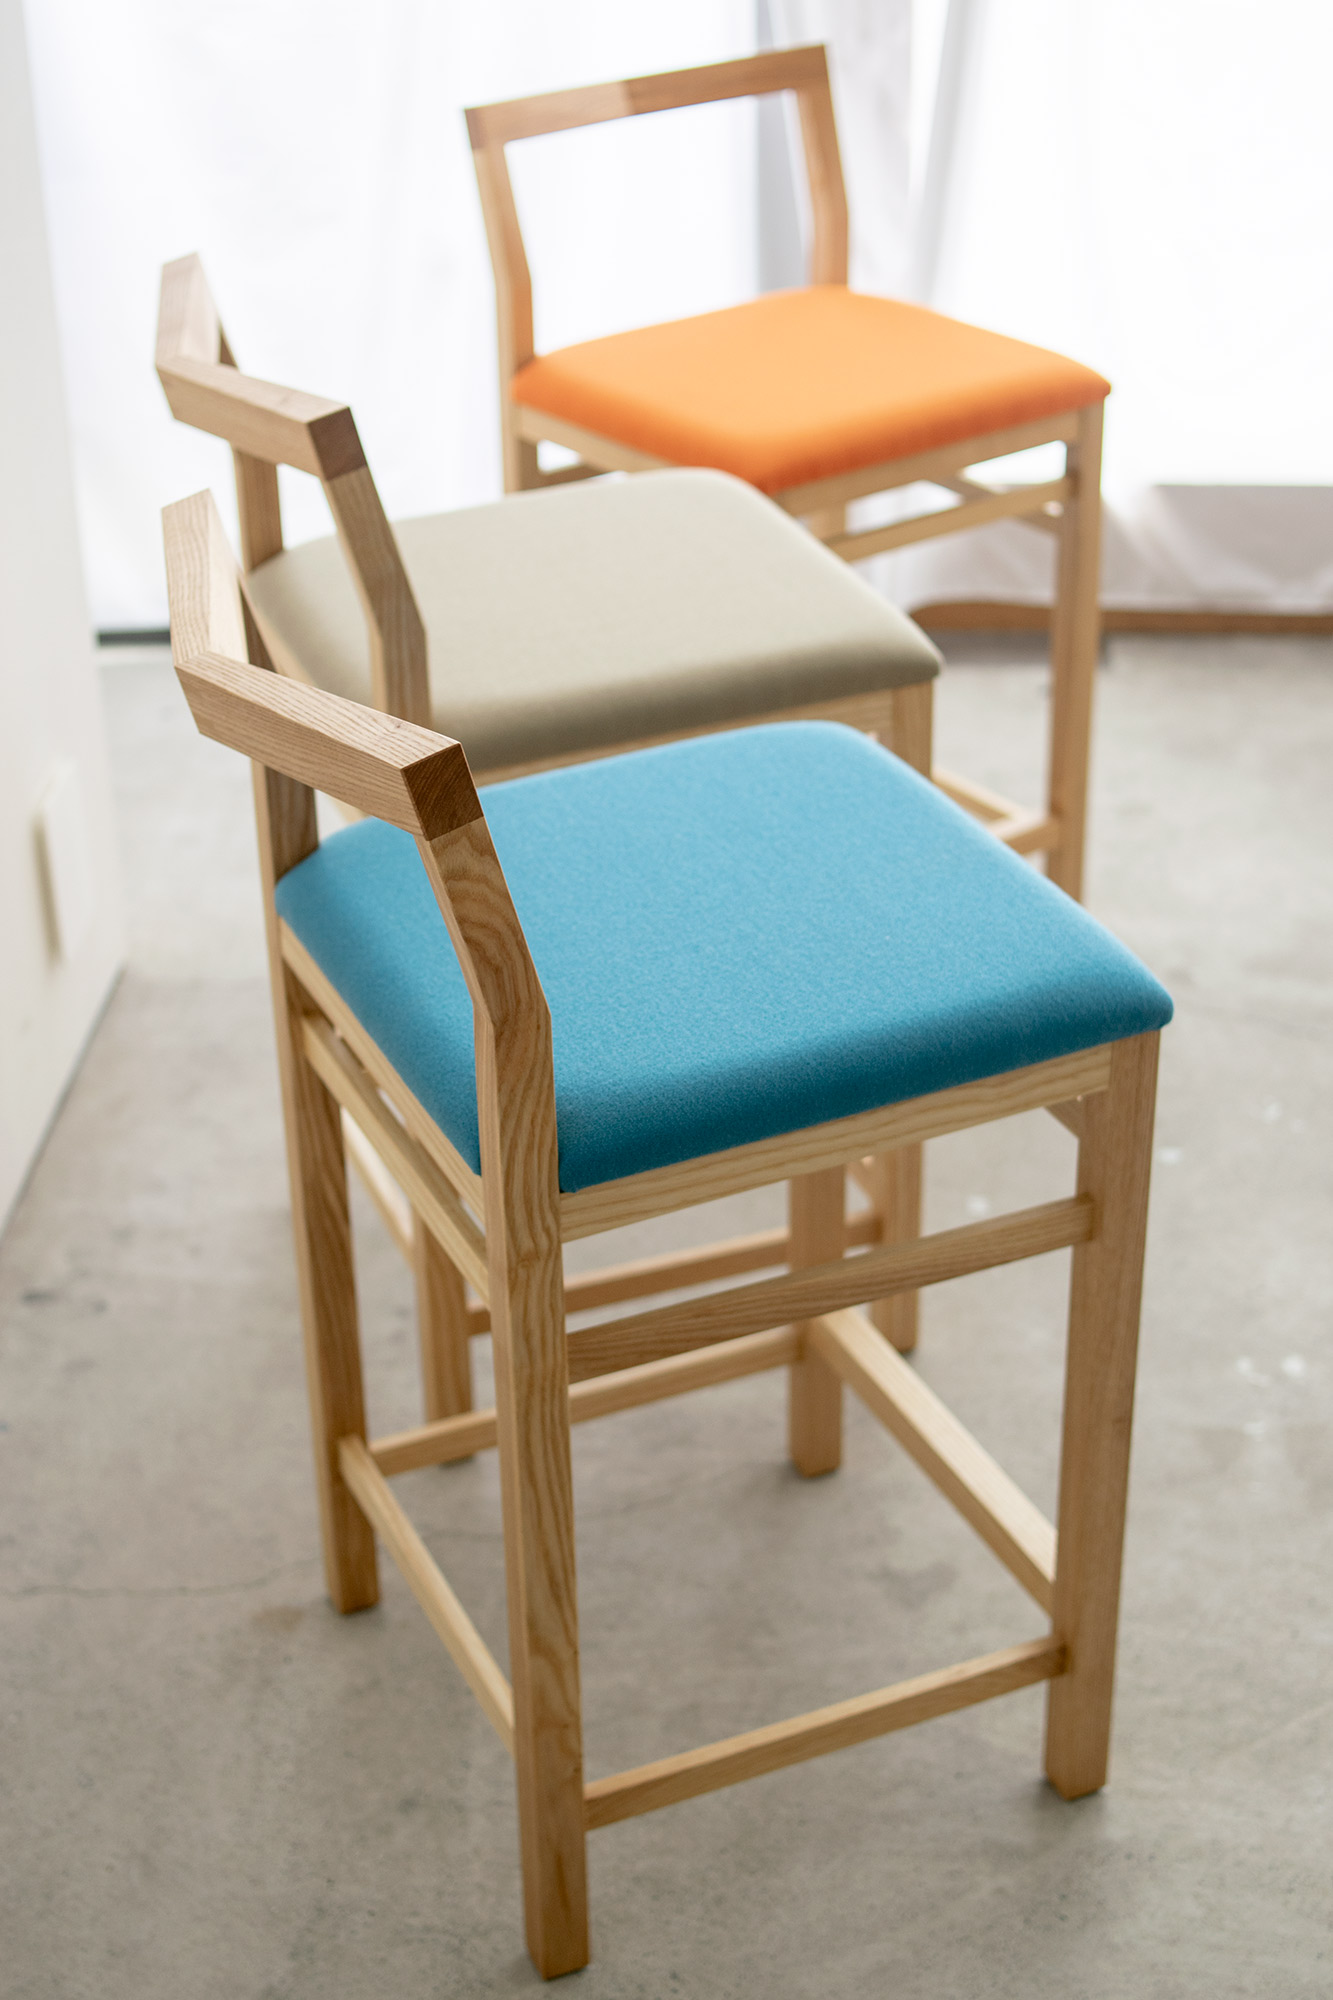 Hight type pico chair